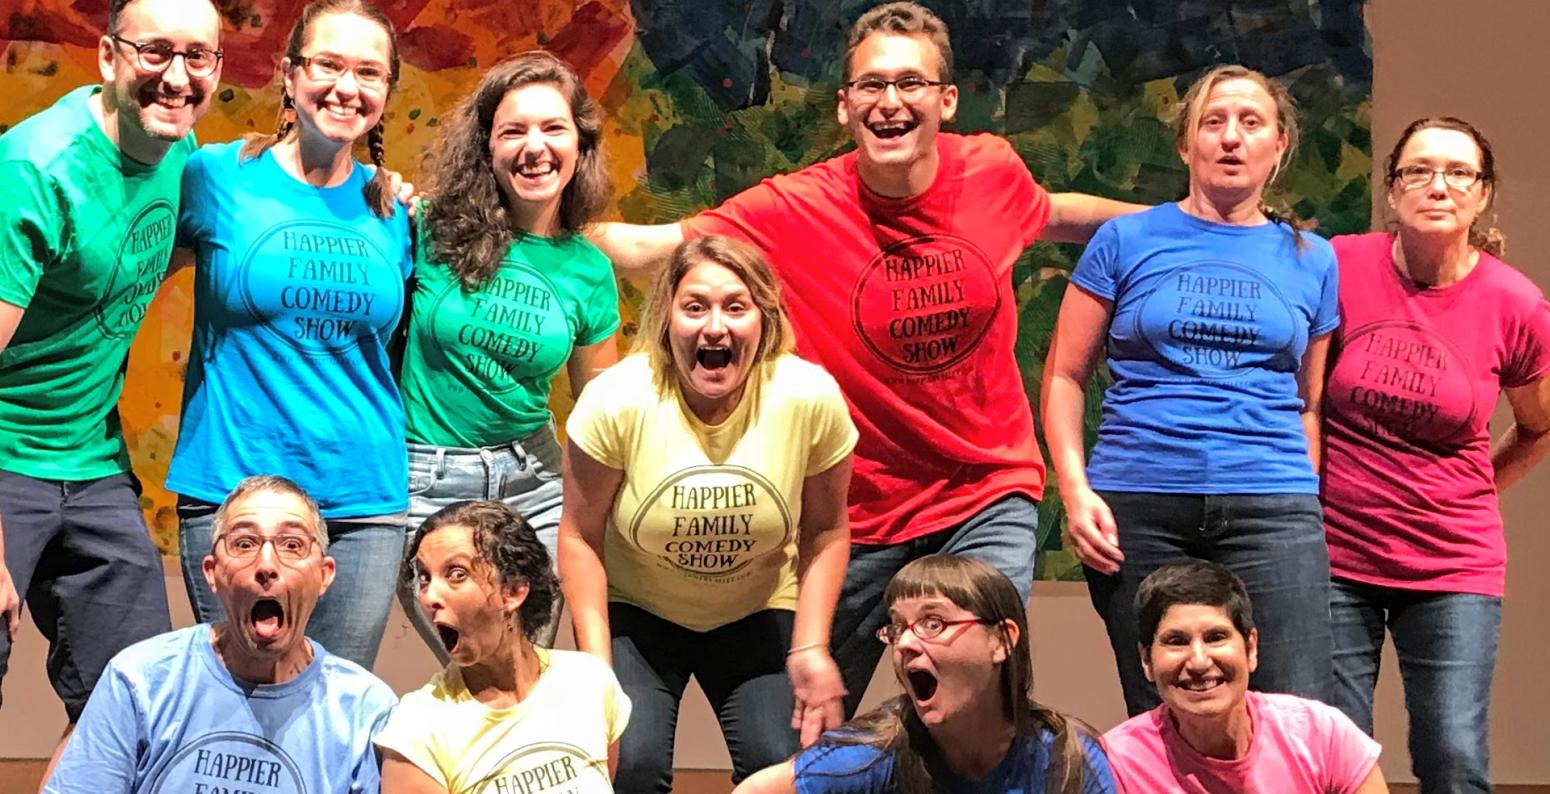 Happier Family players on stage in an assortment of colored T-shirts